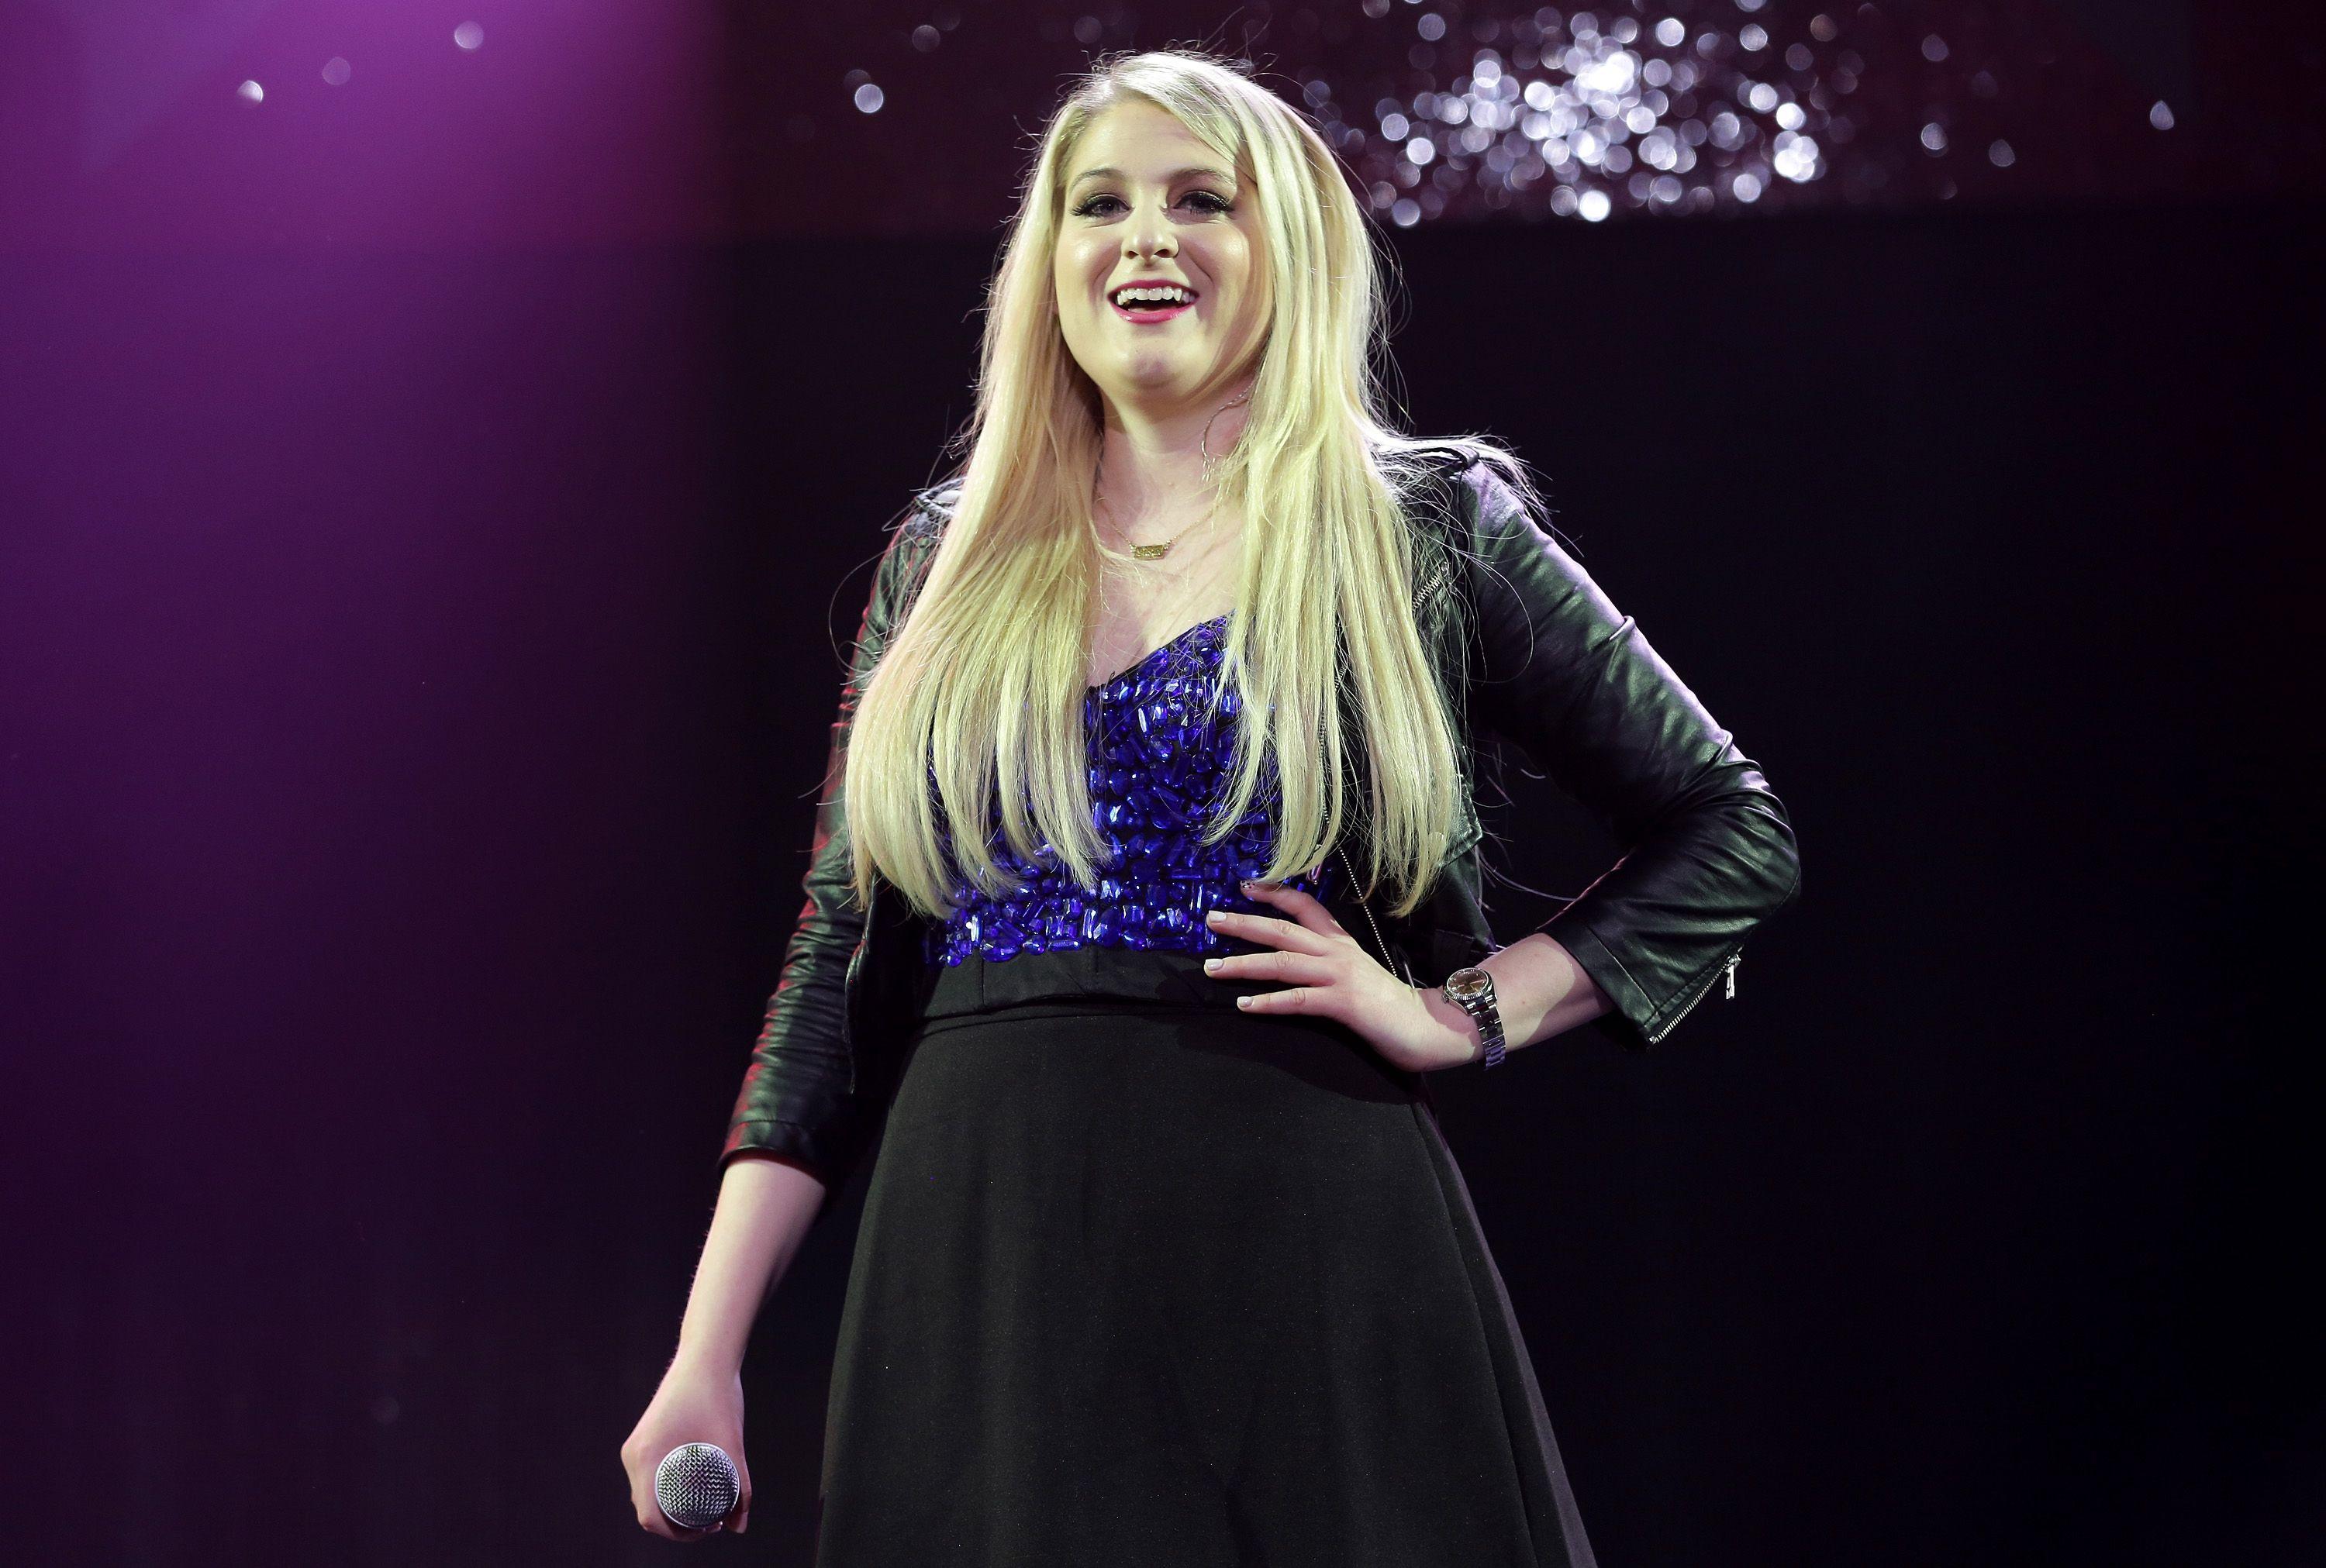 All About That Bass Singer Meghan Trainer on Body Meghan Trainor HD phone  wallpaper  Pxfuel